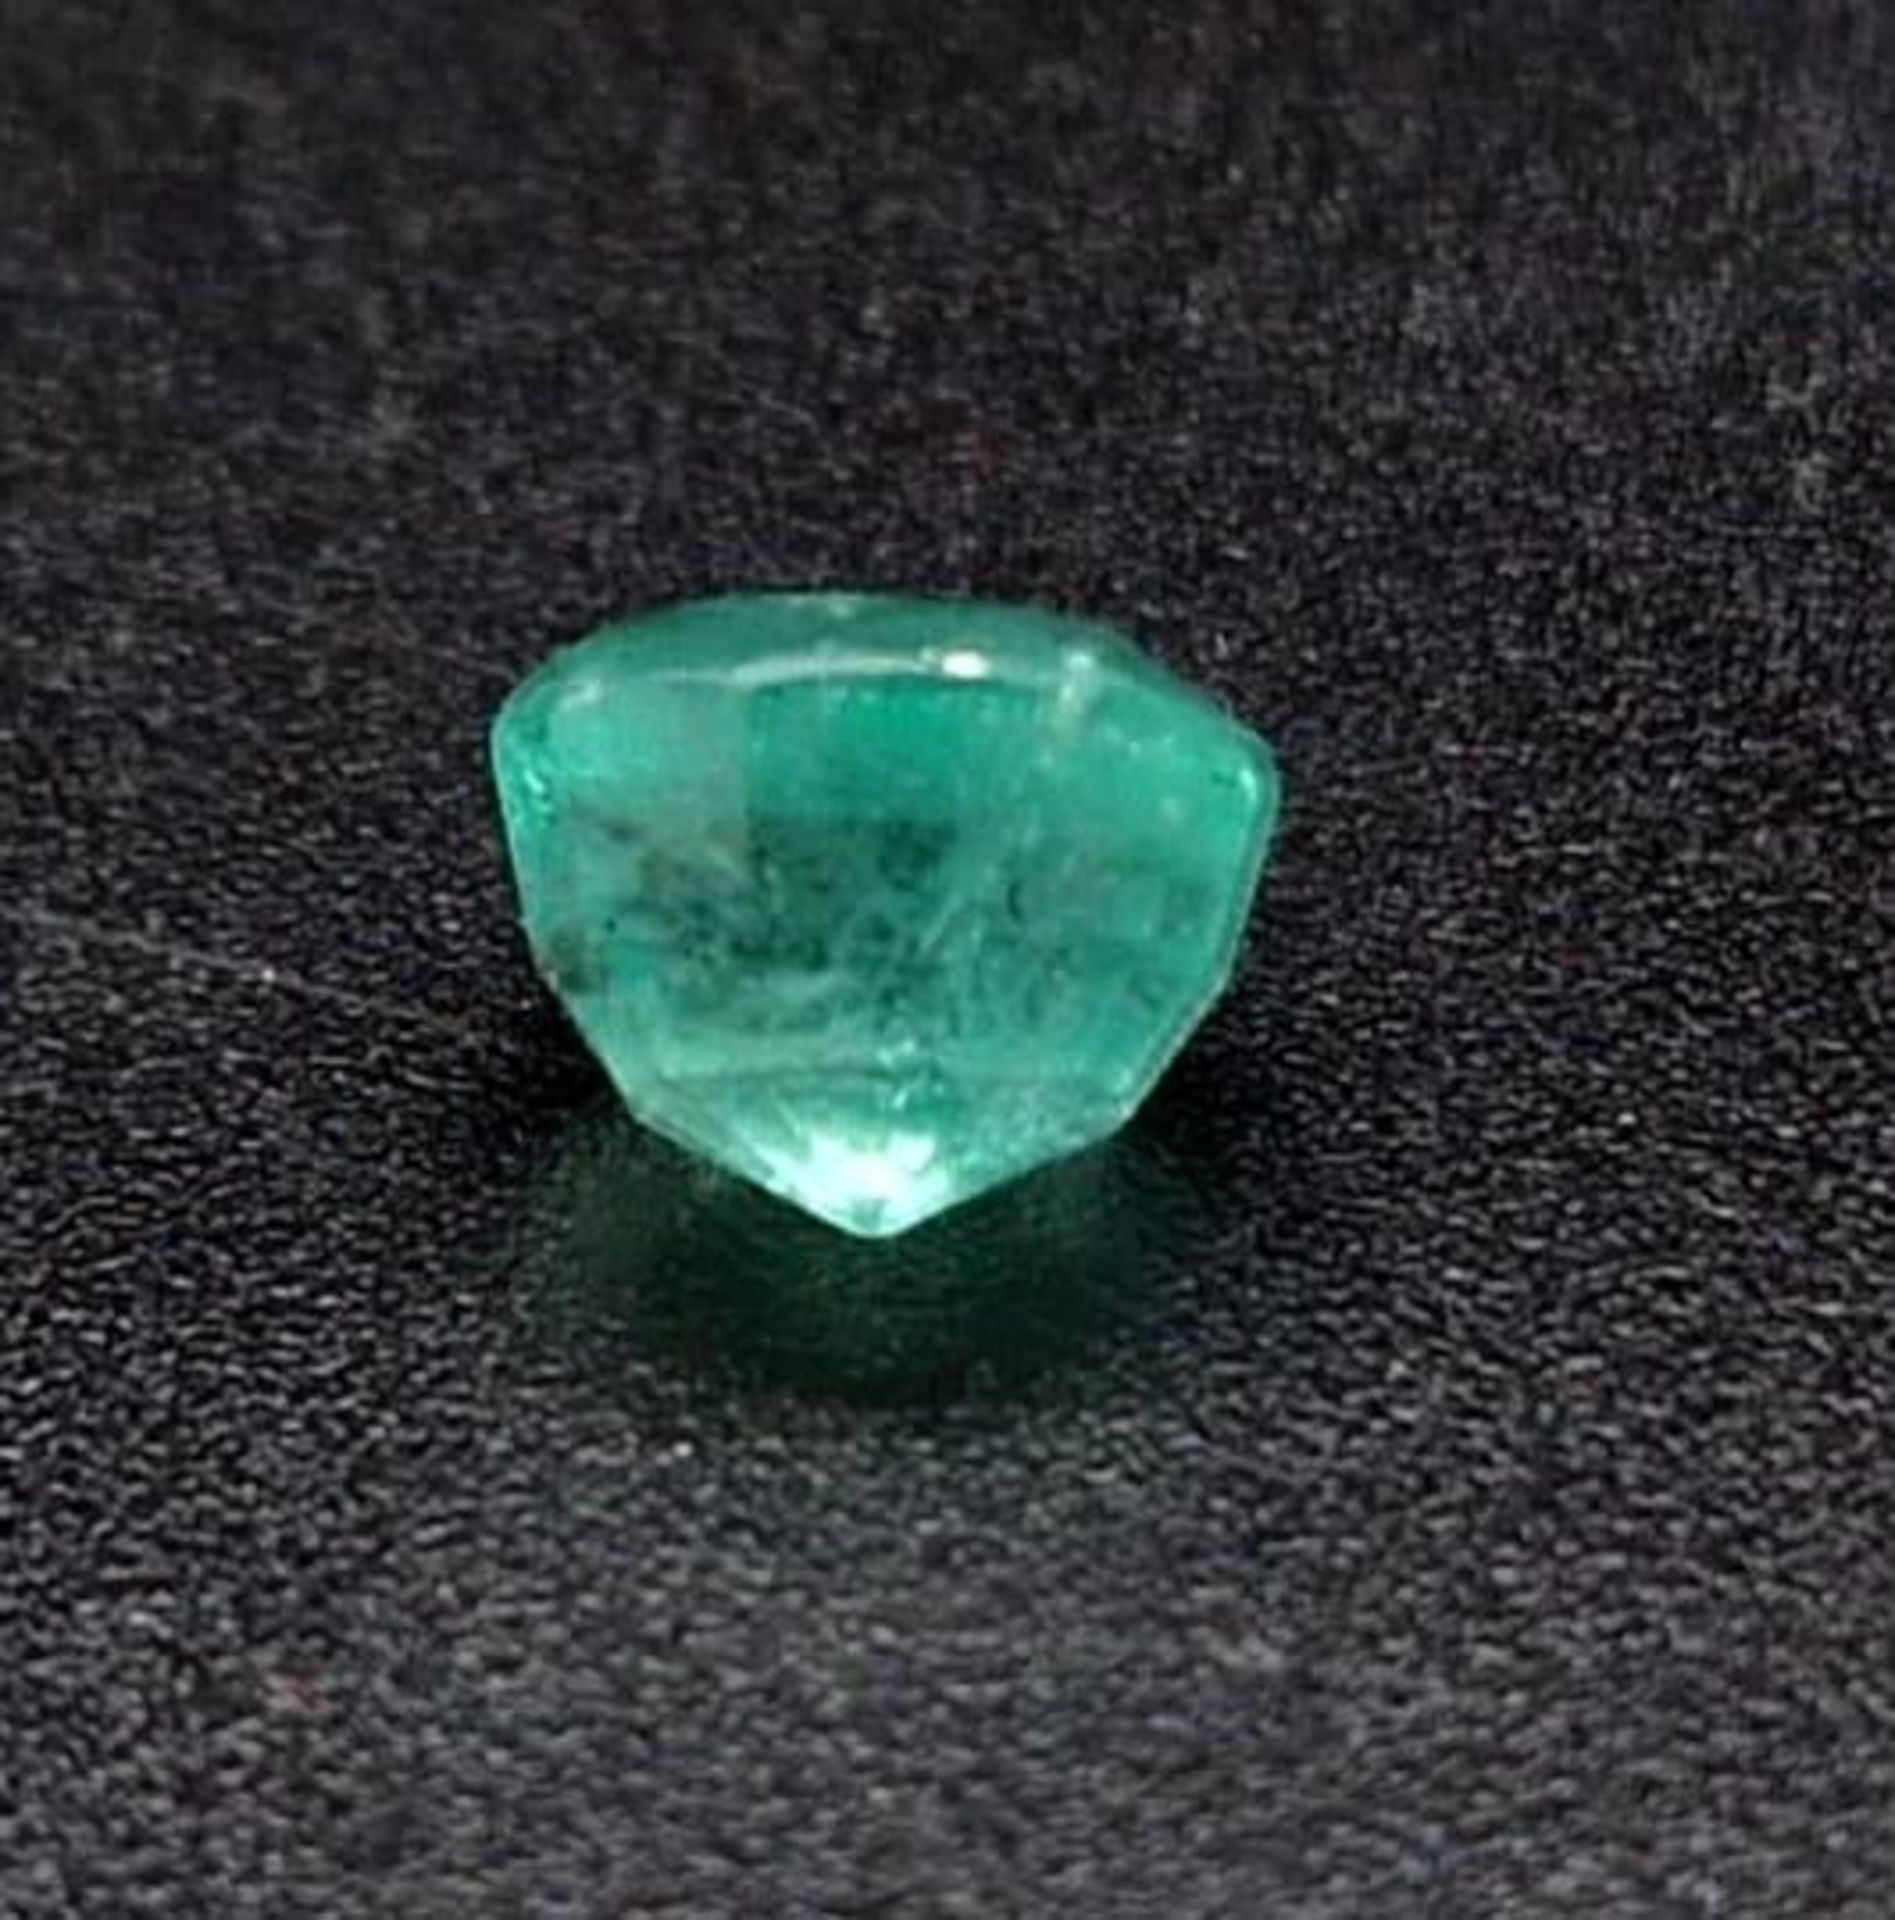 A Rare 2.01ct Oval Cut Emerald from Afghanistan. Untreated, and comes with a GGI certificate. - Image 5 of 5